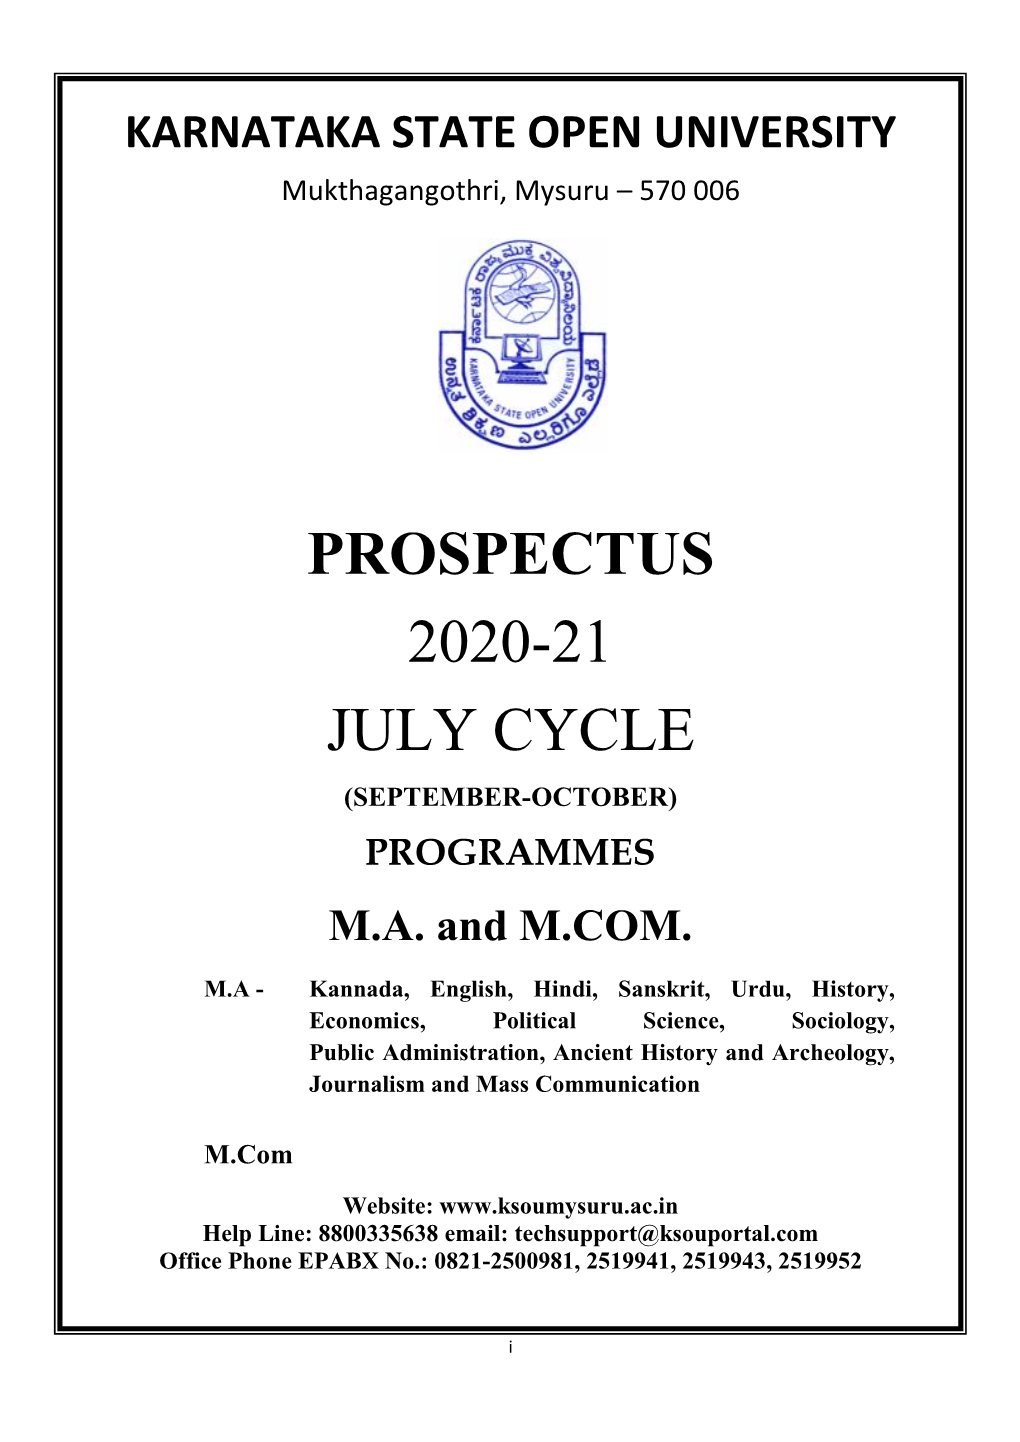 Prospectus 2020-21 July Cycle (September-October) Programmes M.A